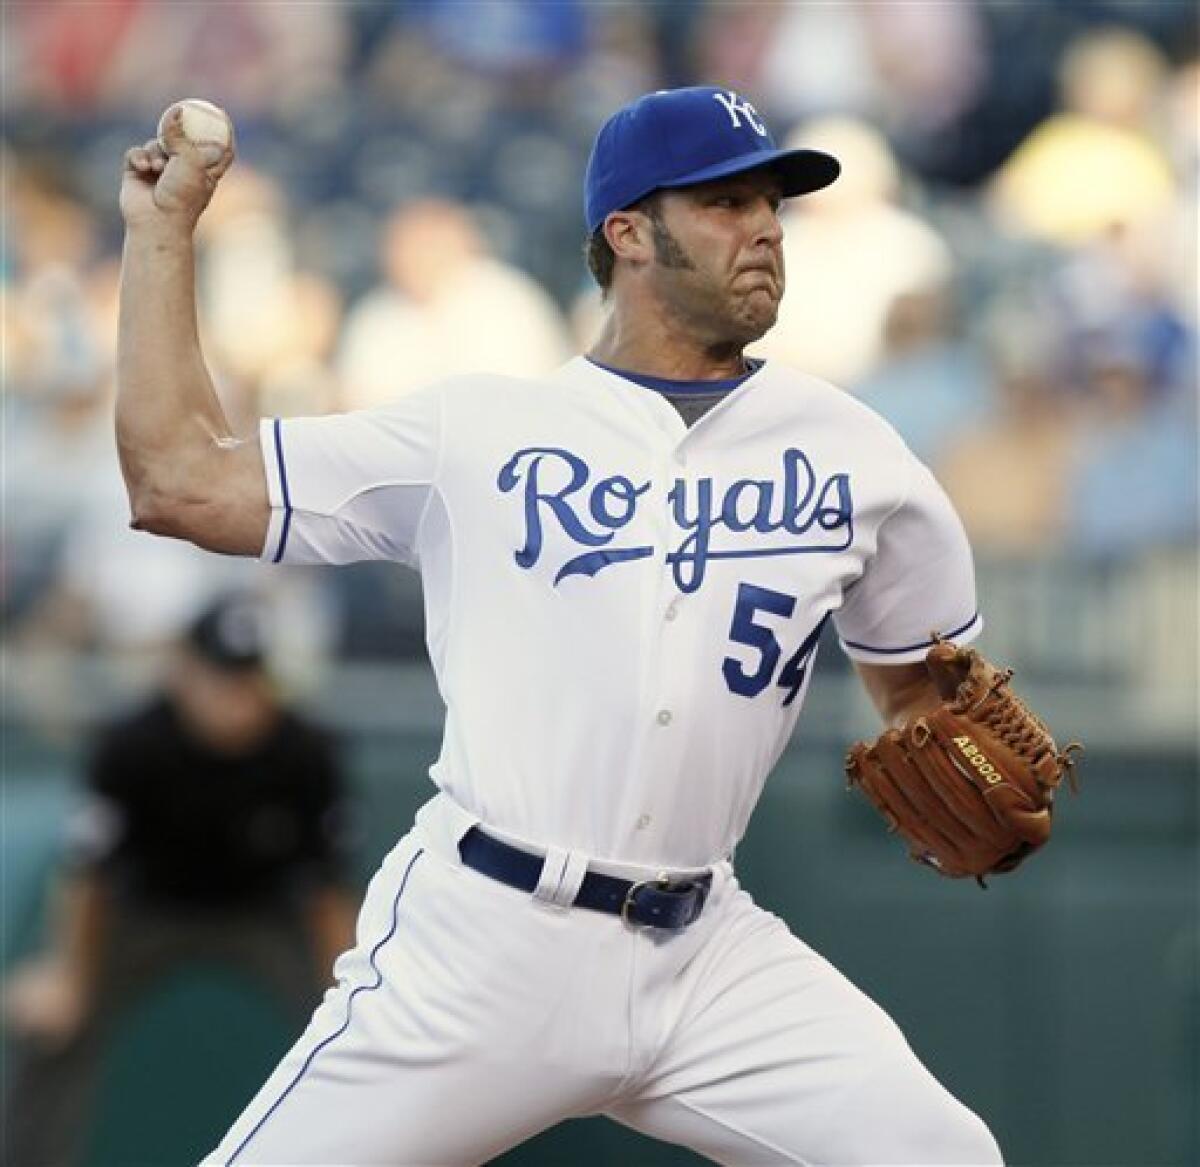 Kansas City Royals starting pitcher Anthony Lerew throws in the first inning of a baseball game against the Houston Astros Thursday, June 17, 2010, in Kansas City, Mo. (AP Photo/Ed Zurga)